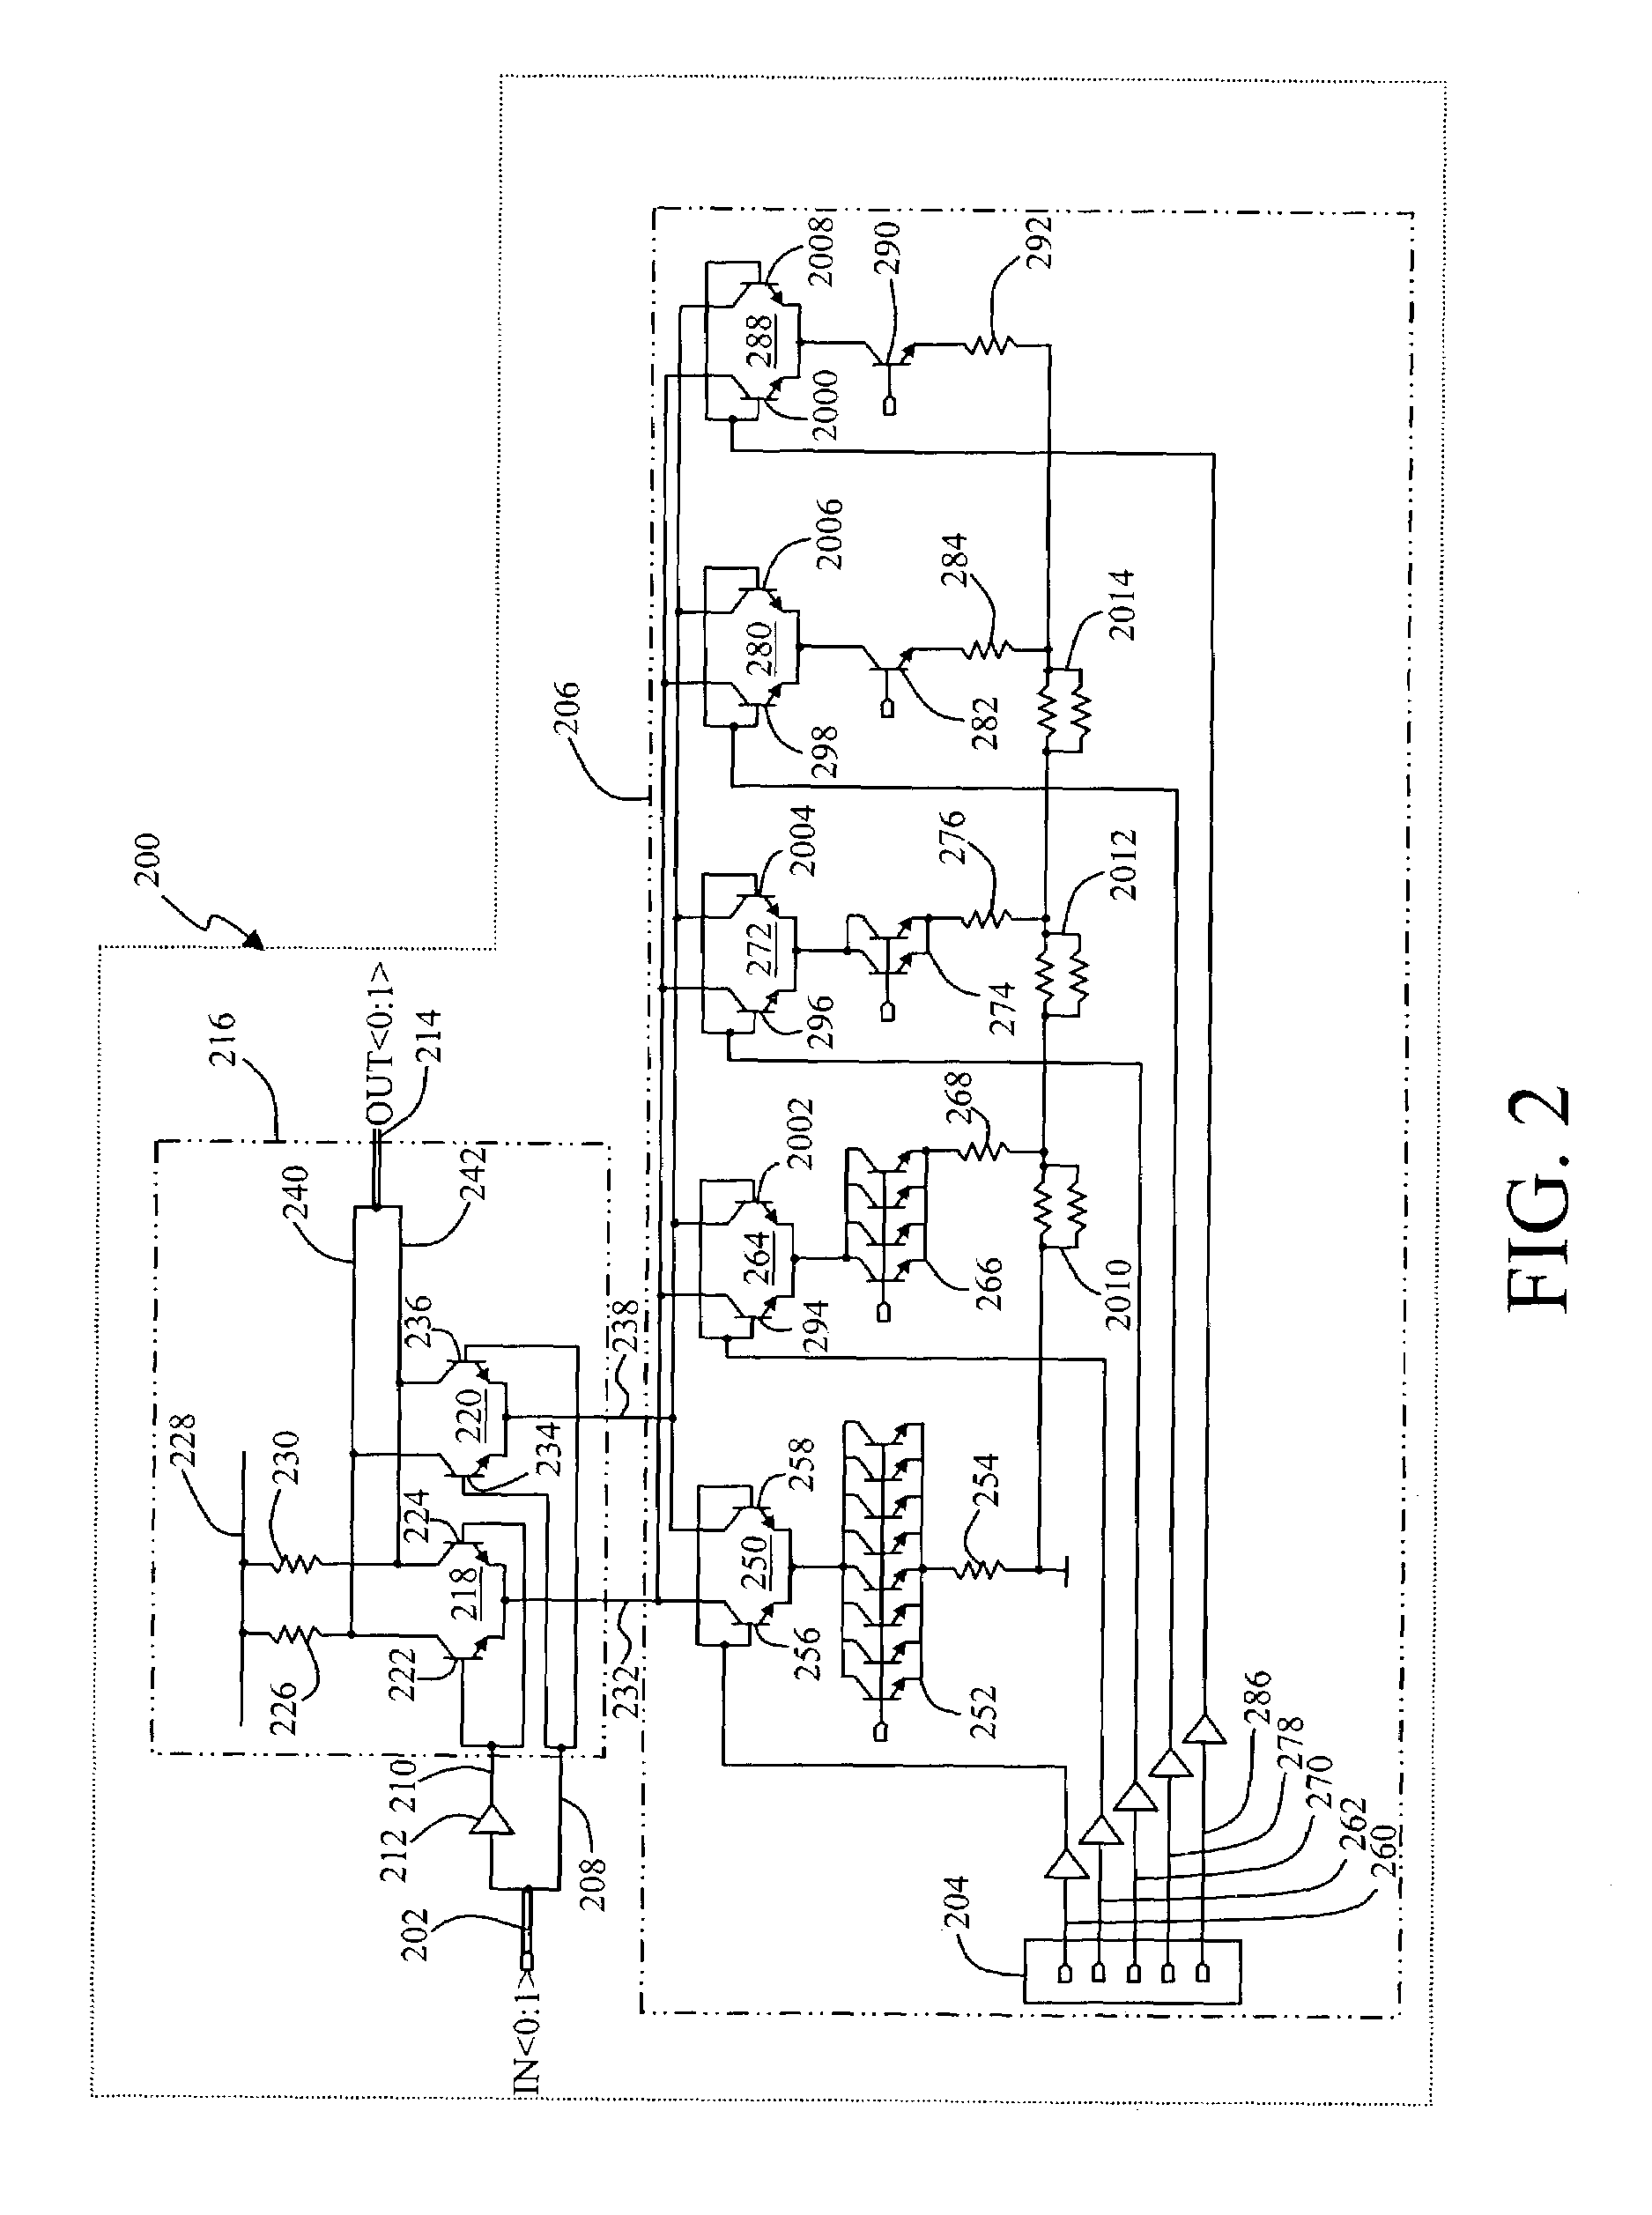 Time delay apparatus and method of using same